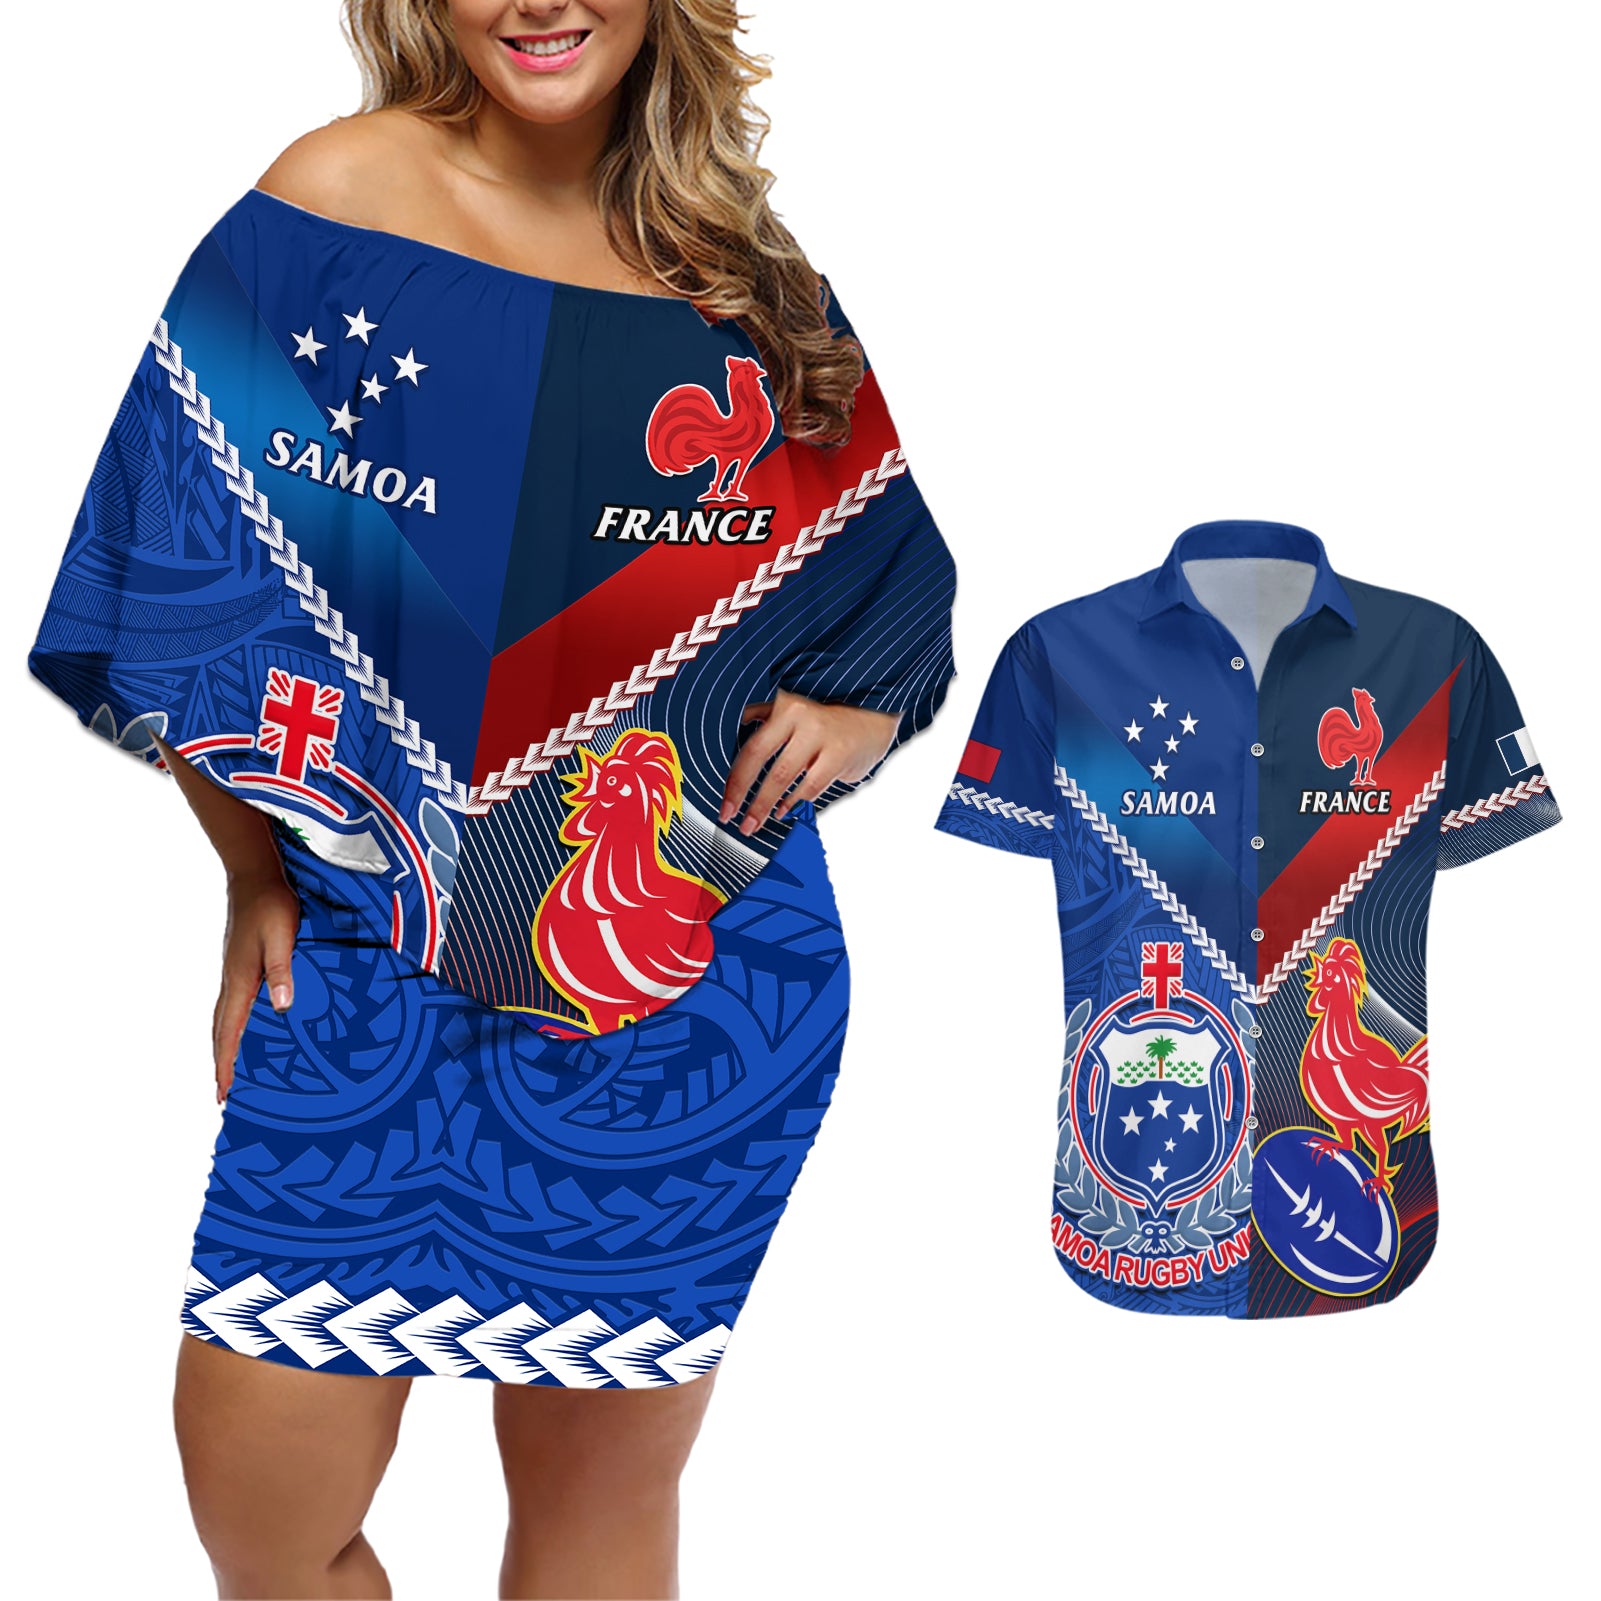 samoa-and-france-rugby-couples-matching-off-shoulder-short-dress-and-hawaiian-shirt-2023-world-cup-manu-samoa-with-les-bleus